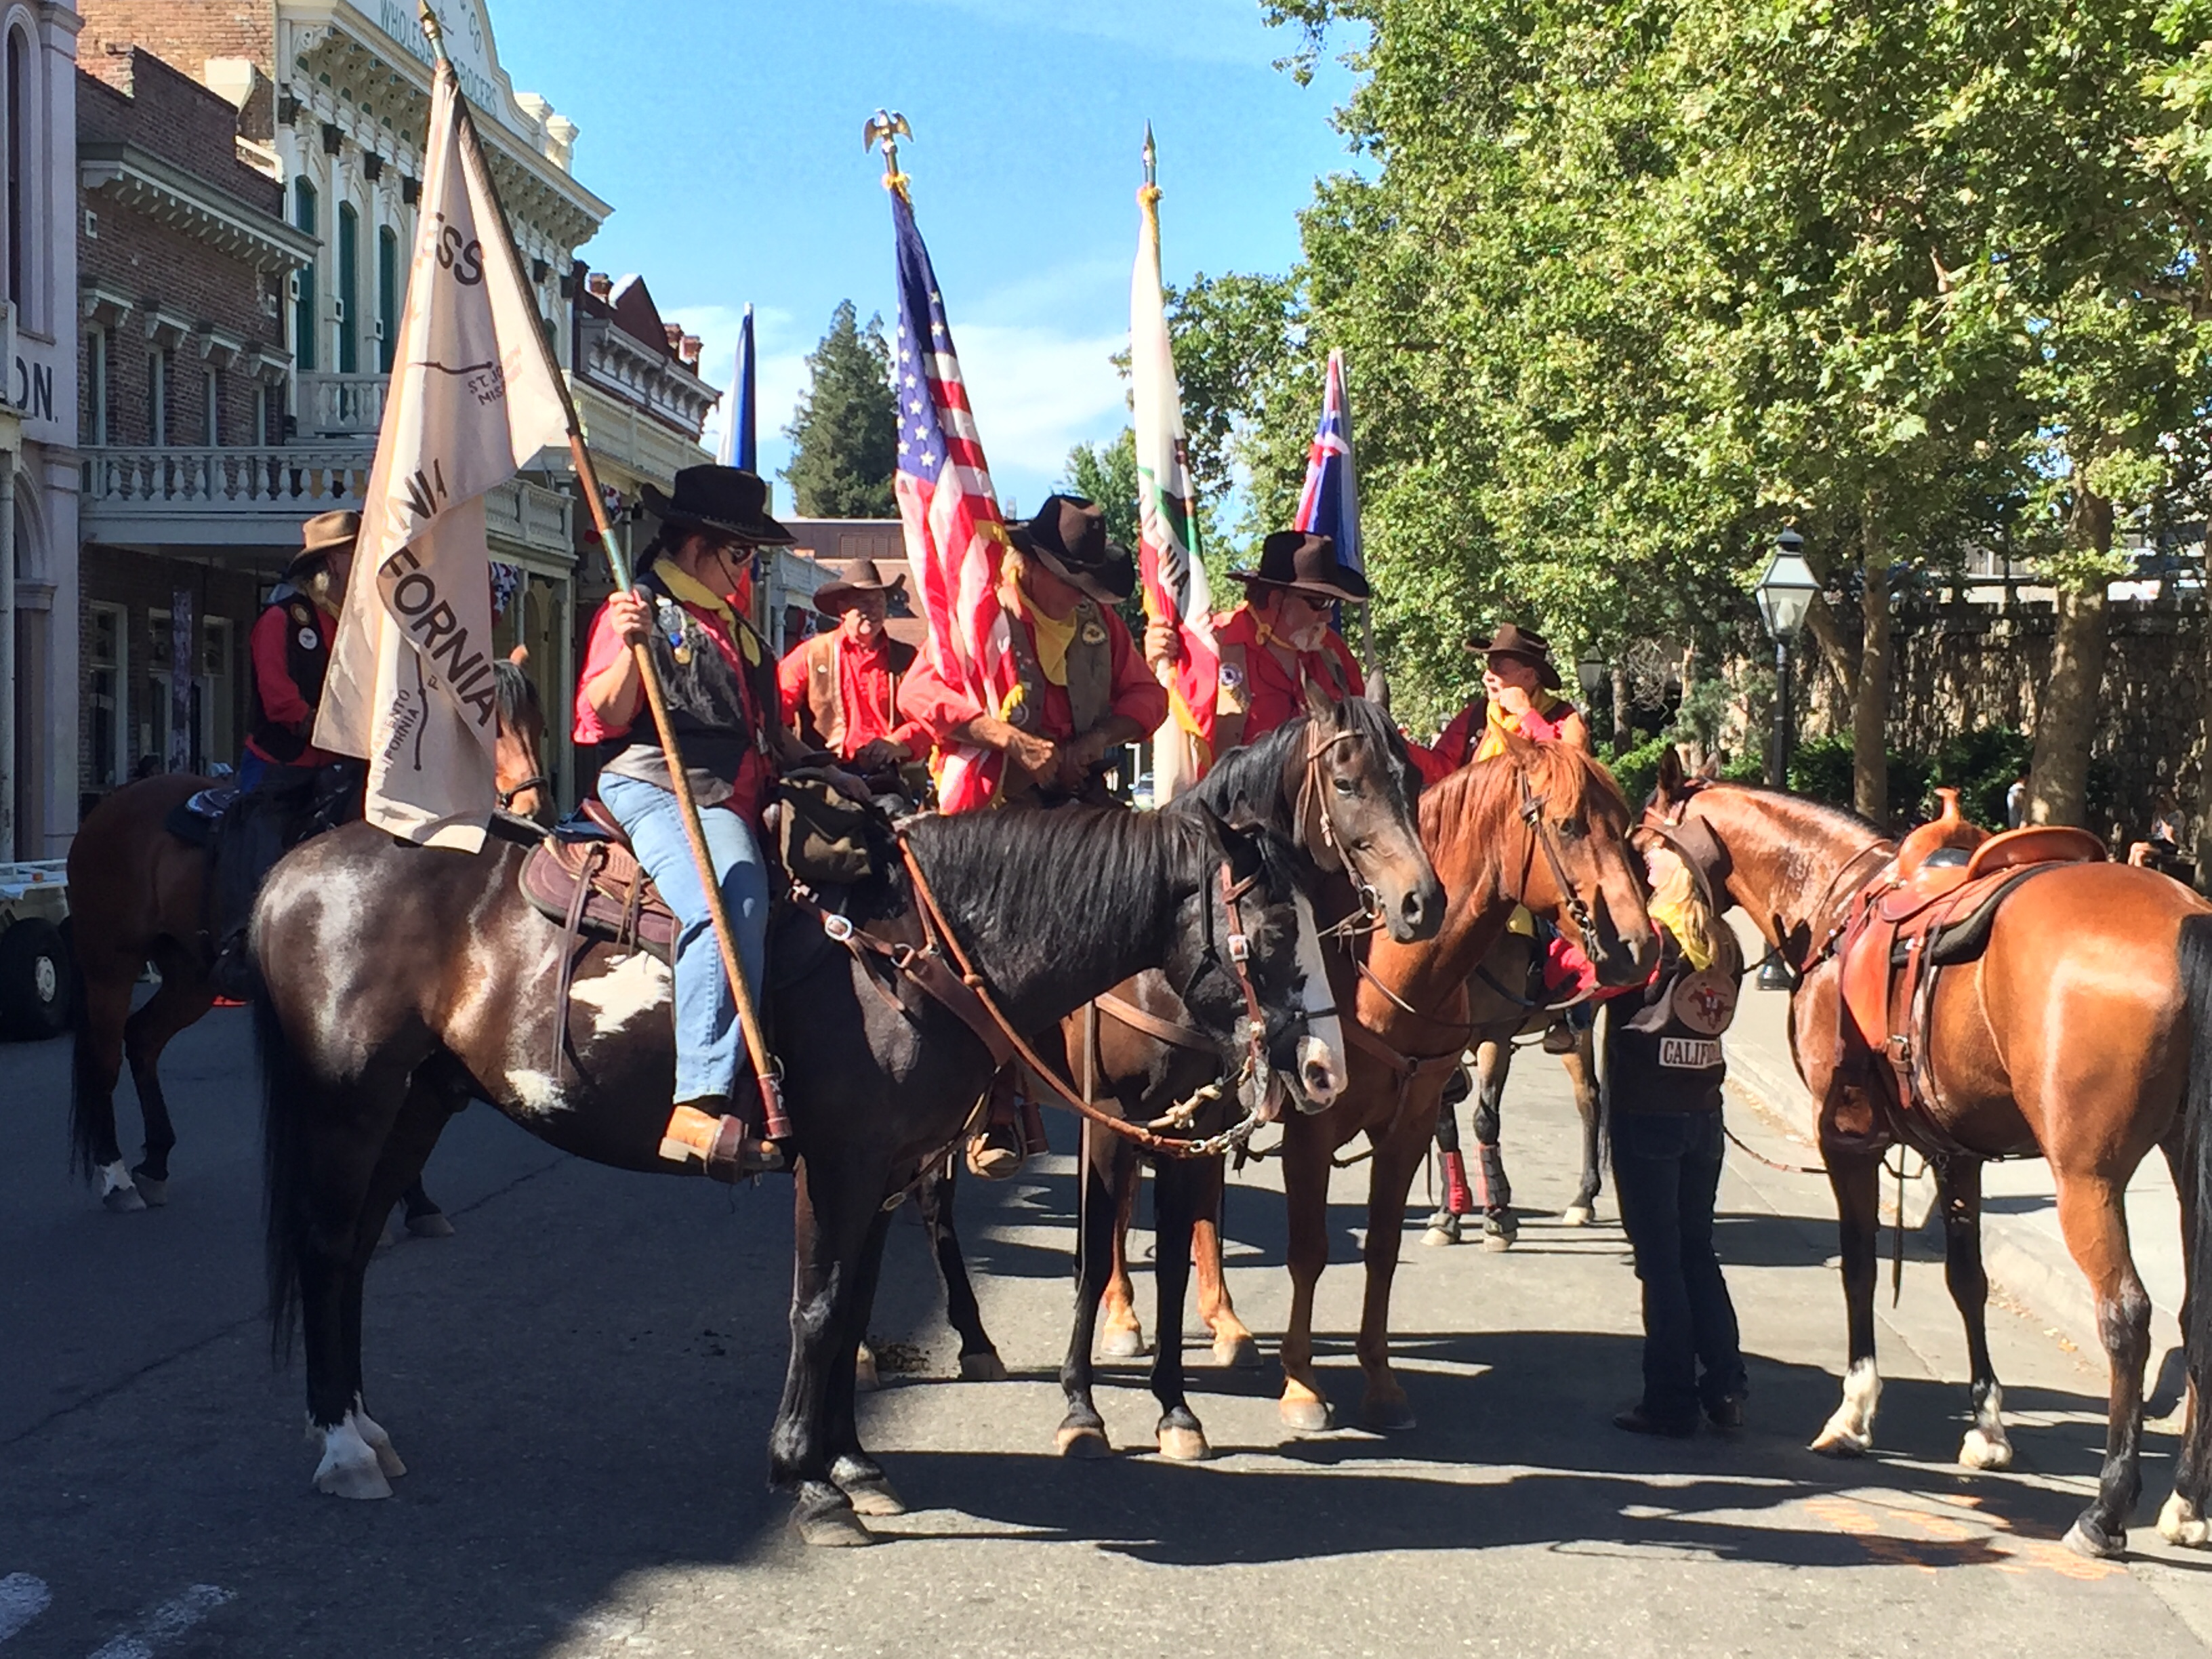 Pony Express arrives in Sacramento after nearly 2,000 mile trip across